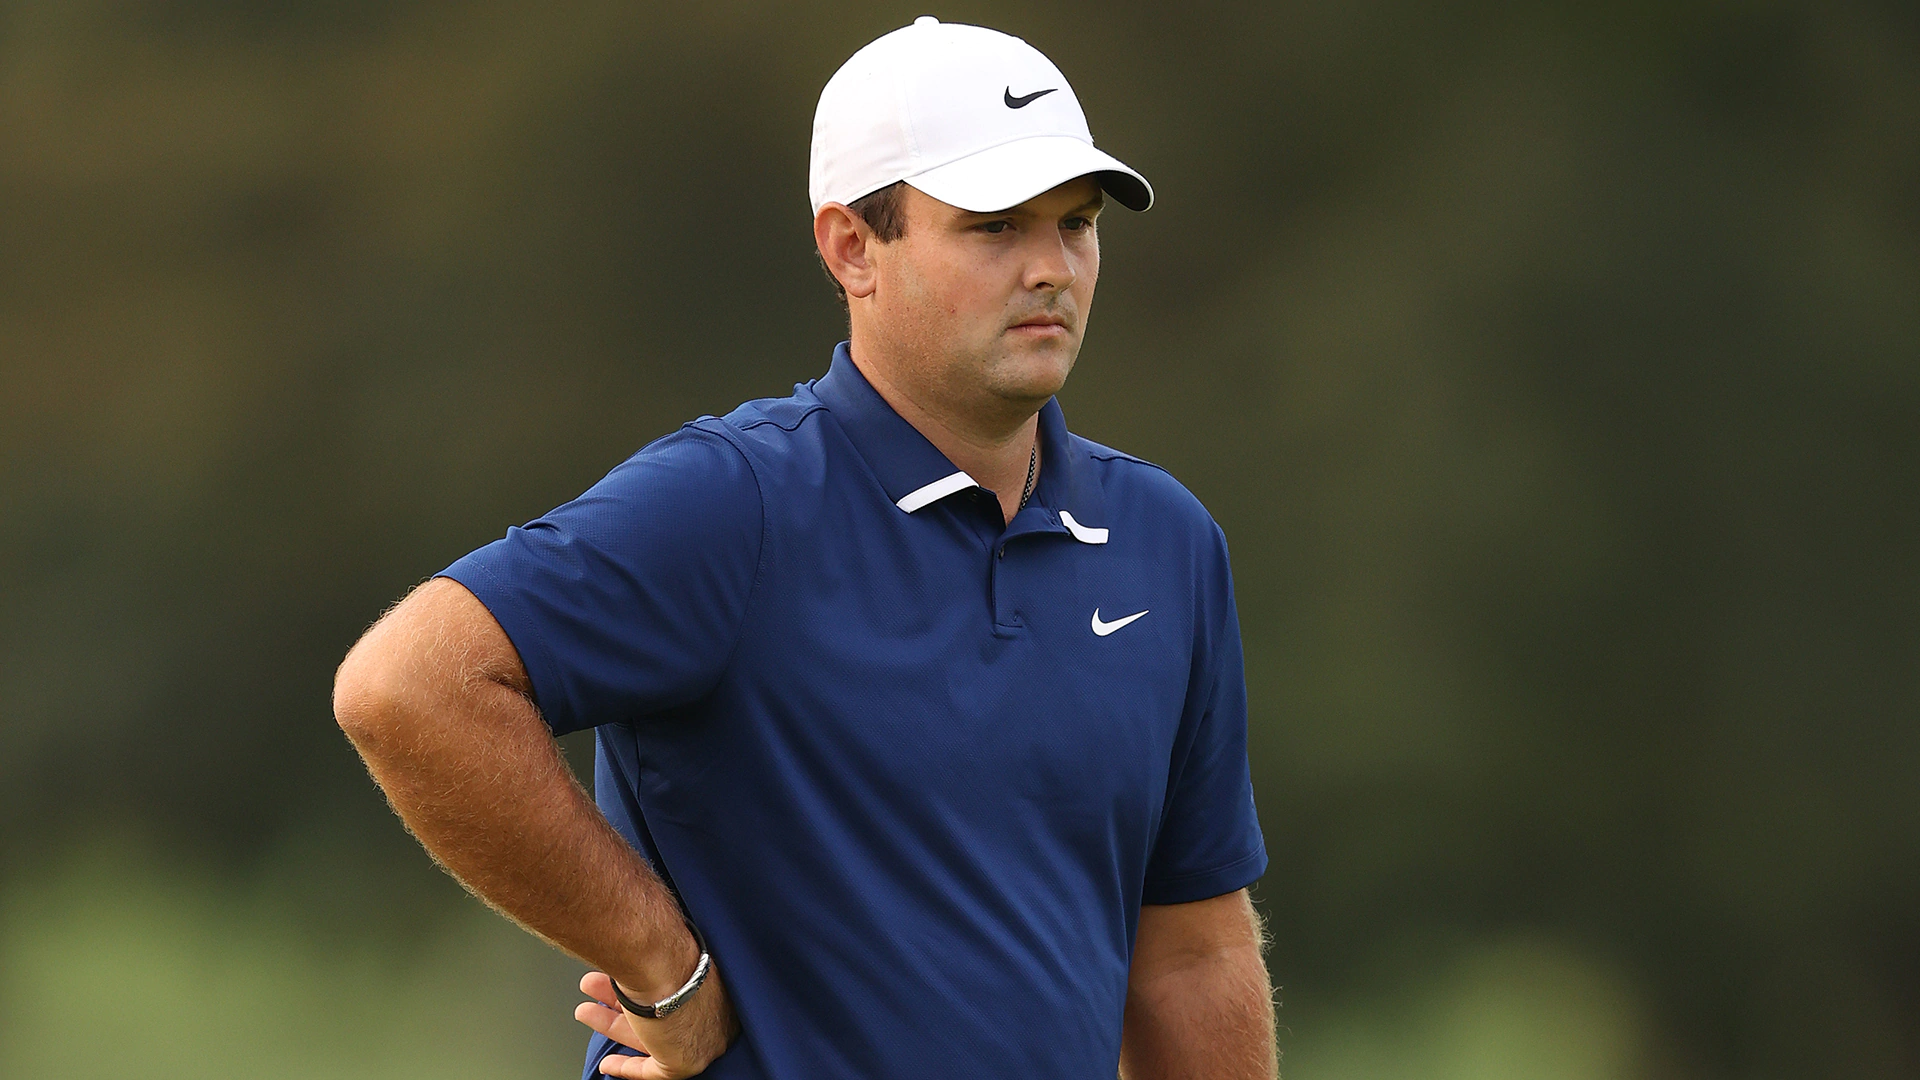 Watch: Patrick Reed aces Winged Foot’s seventh hole in first round of U.S. Open